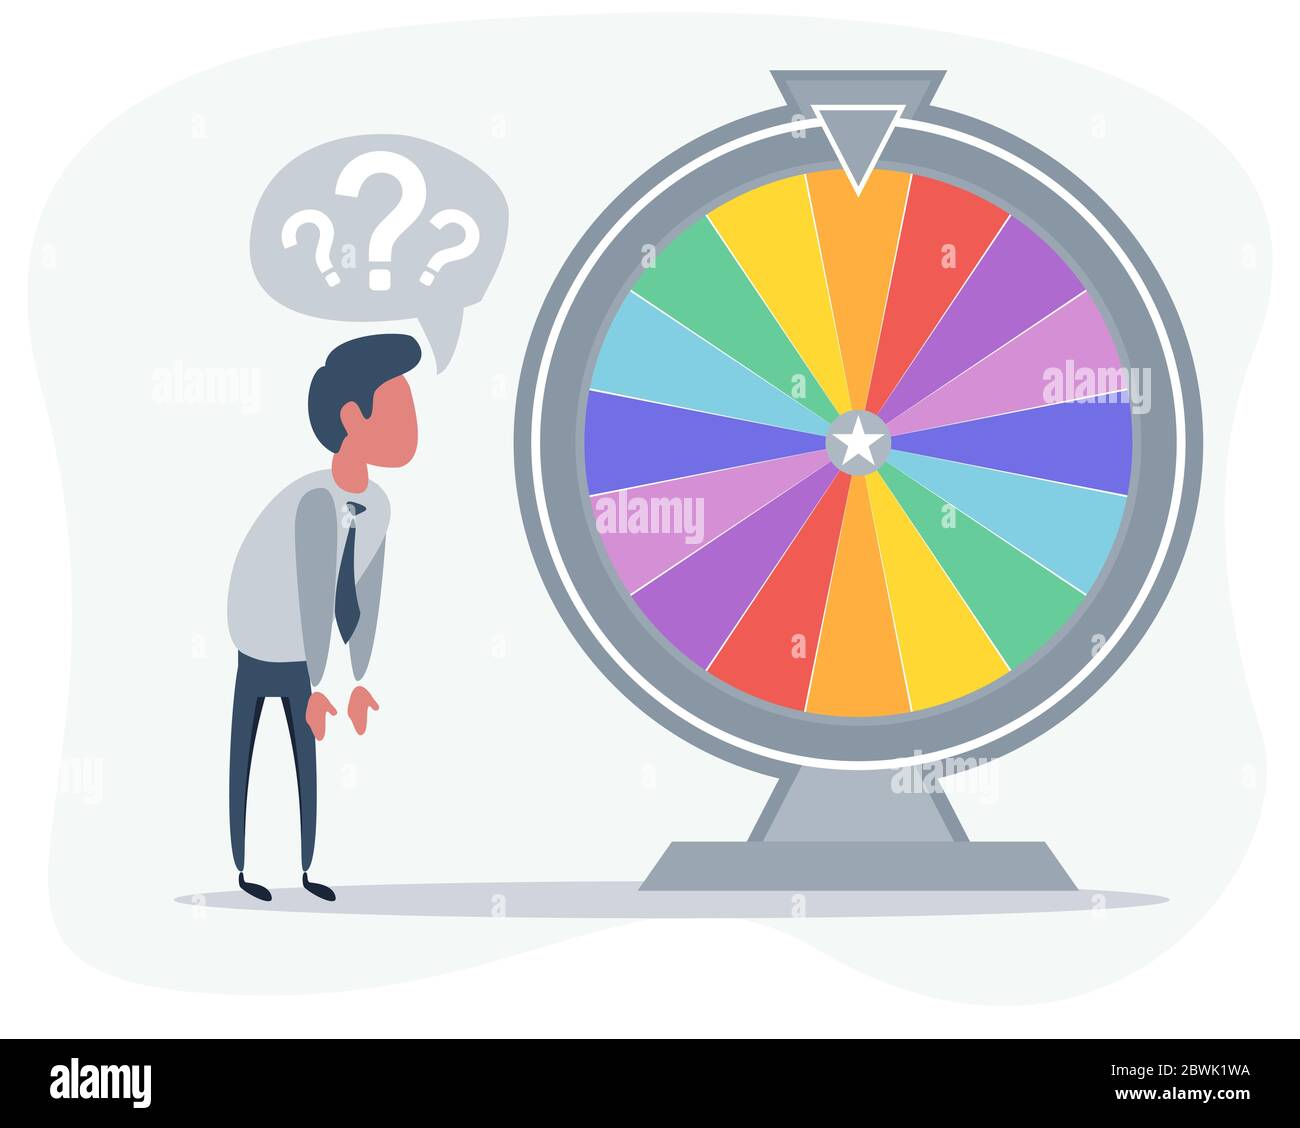 Funny Office Worker Standing Near the Wheel of Business Fortune. Stock Vector